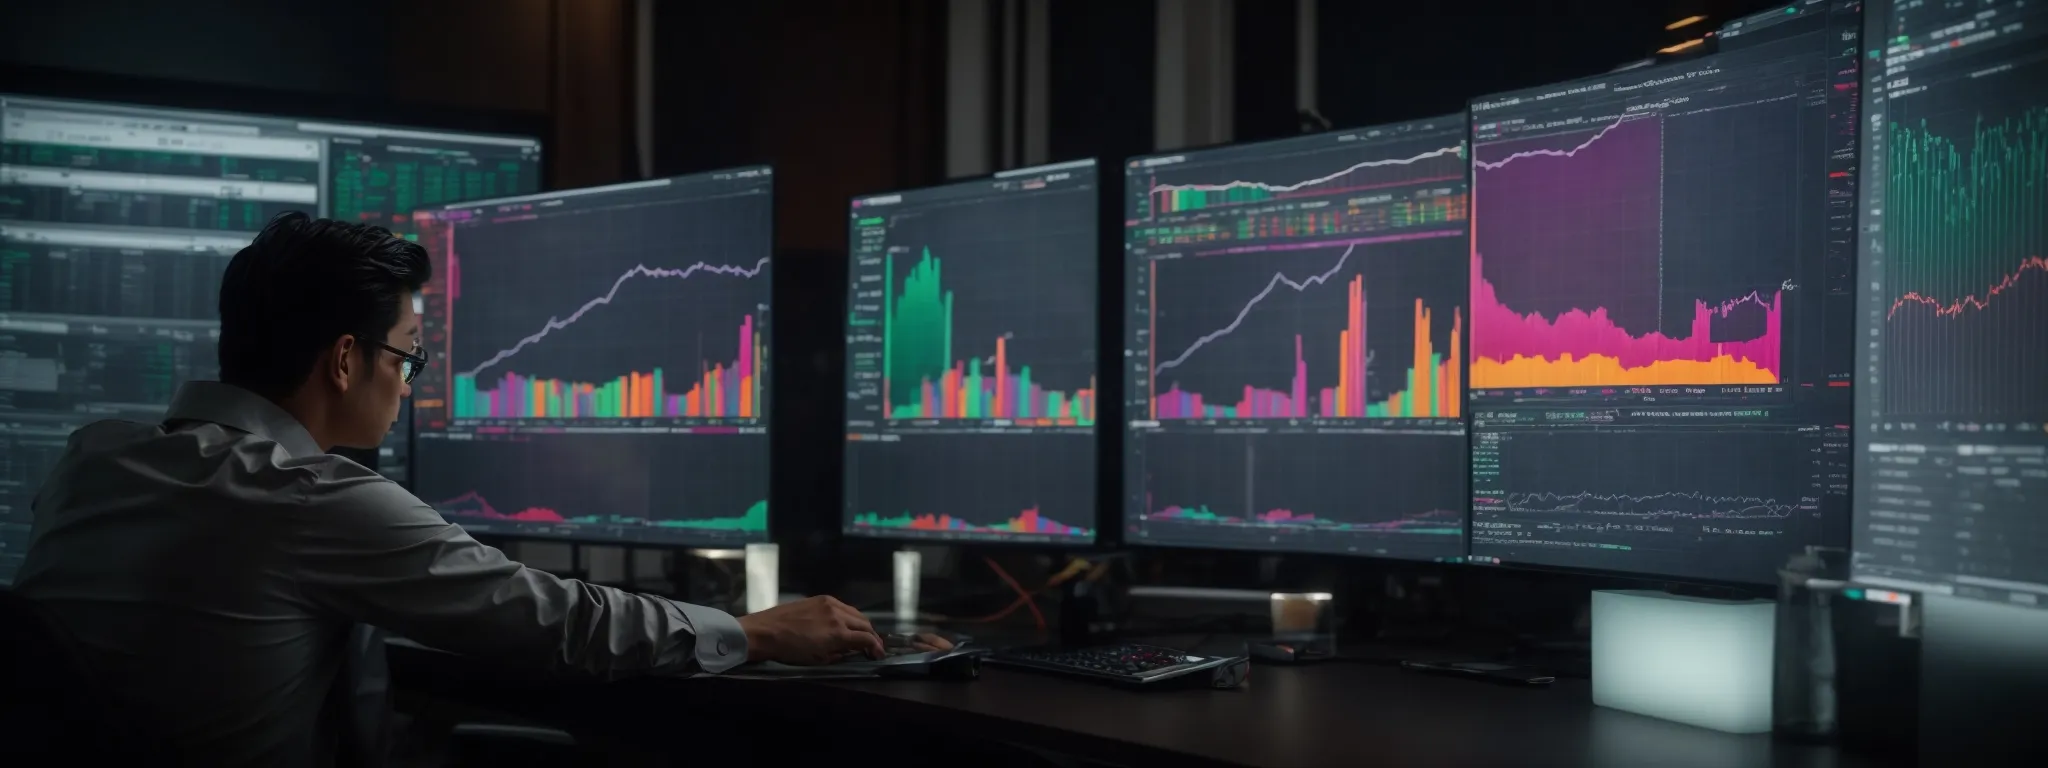 a focused individual analyzes colorful graphs and charts on a computer screen representing seo performance metrics.